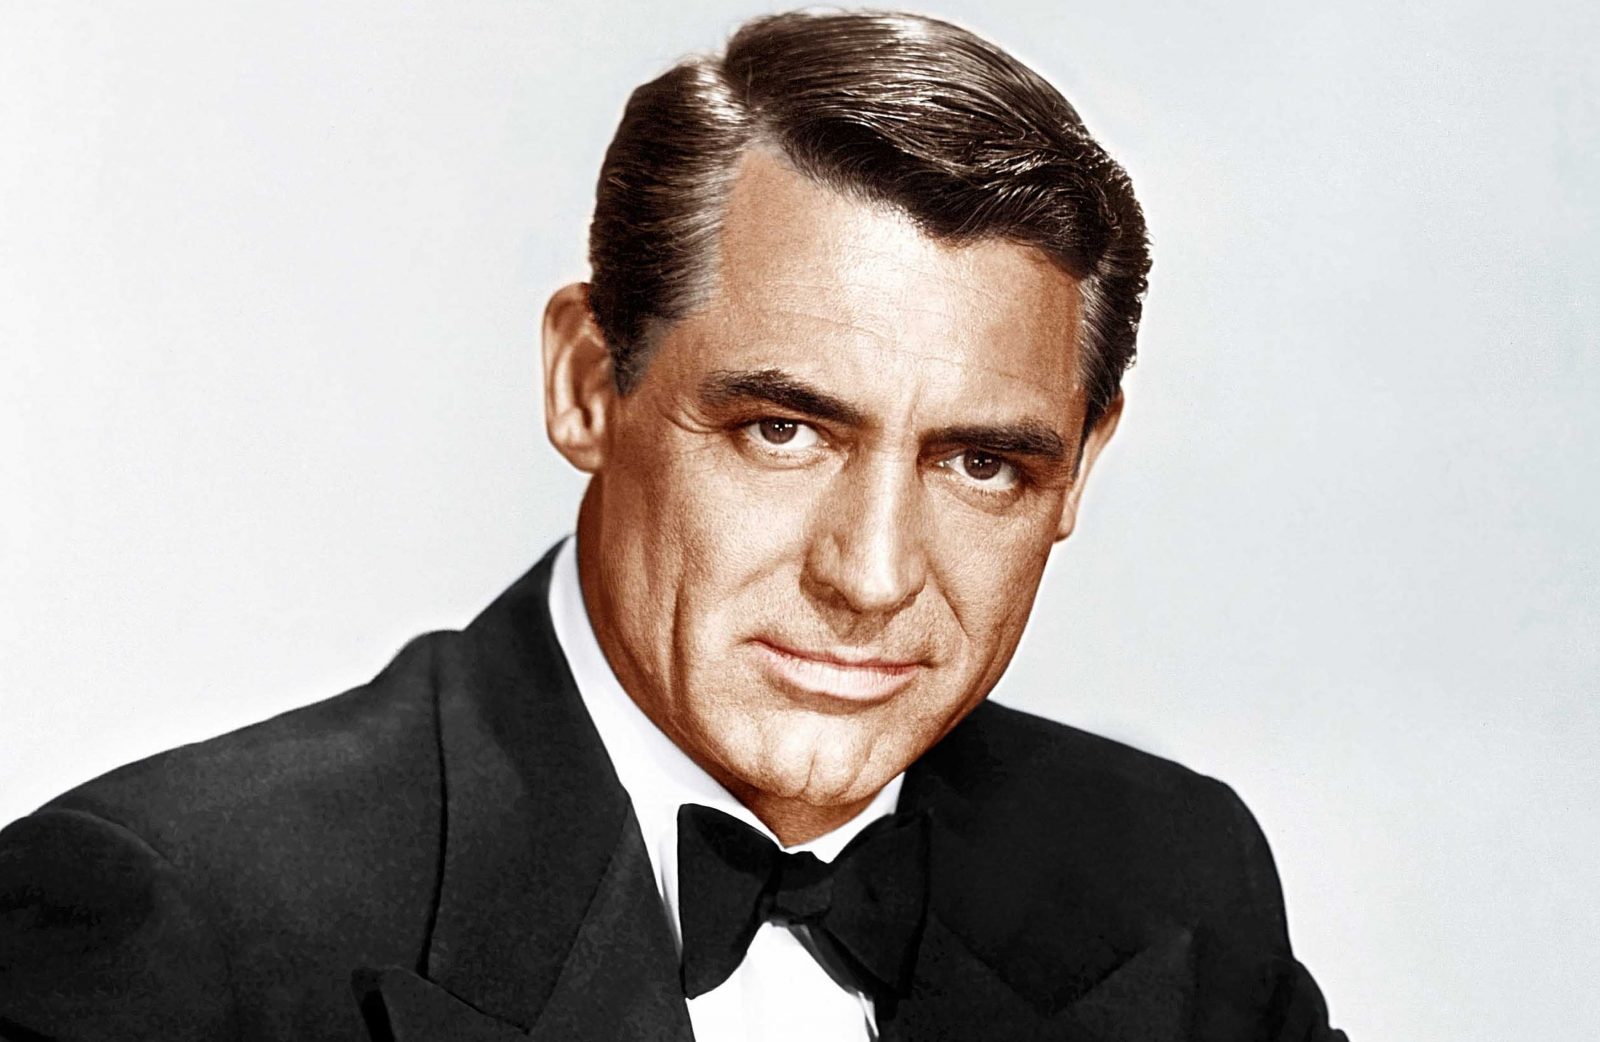 If You Can Score Full Marks on This 1940s Actors Quiz, You Are No Doubt a Boomer Cary Grant